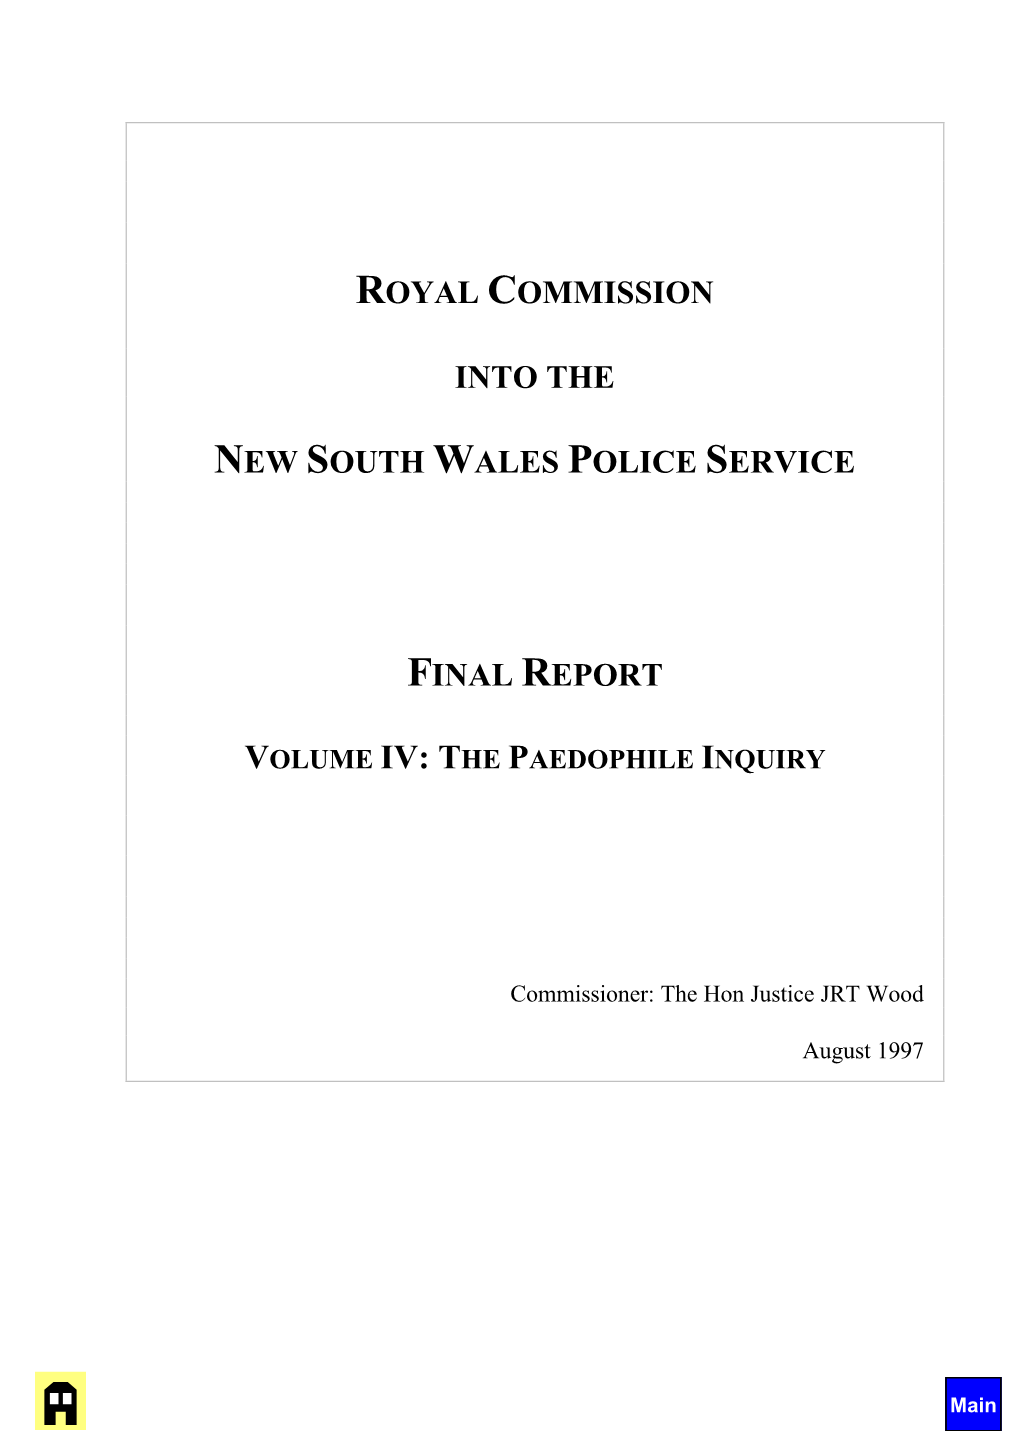 Royal Commission Into the New South Wales Police Service